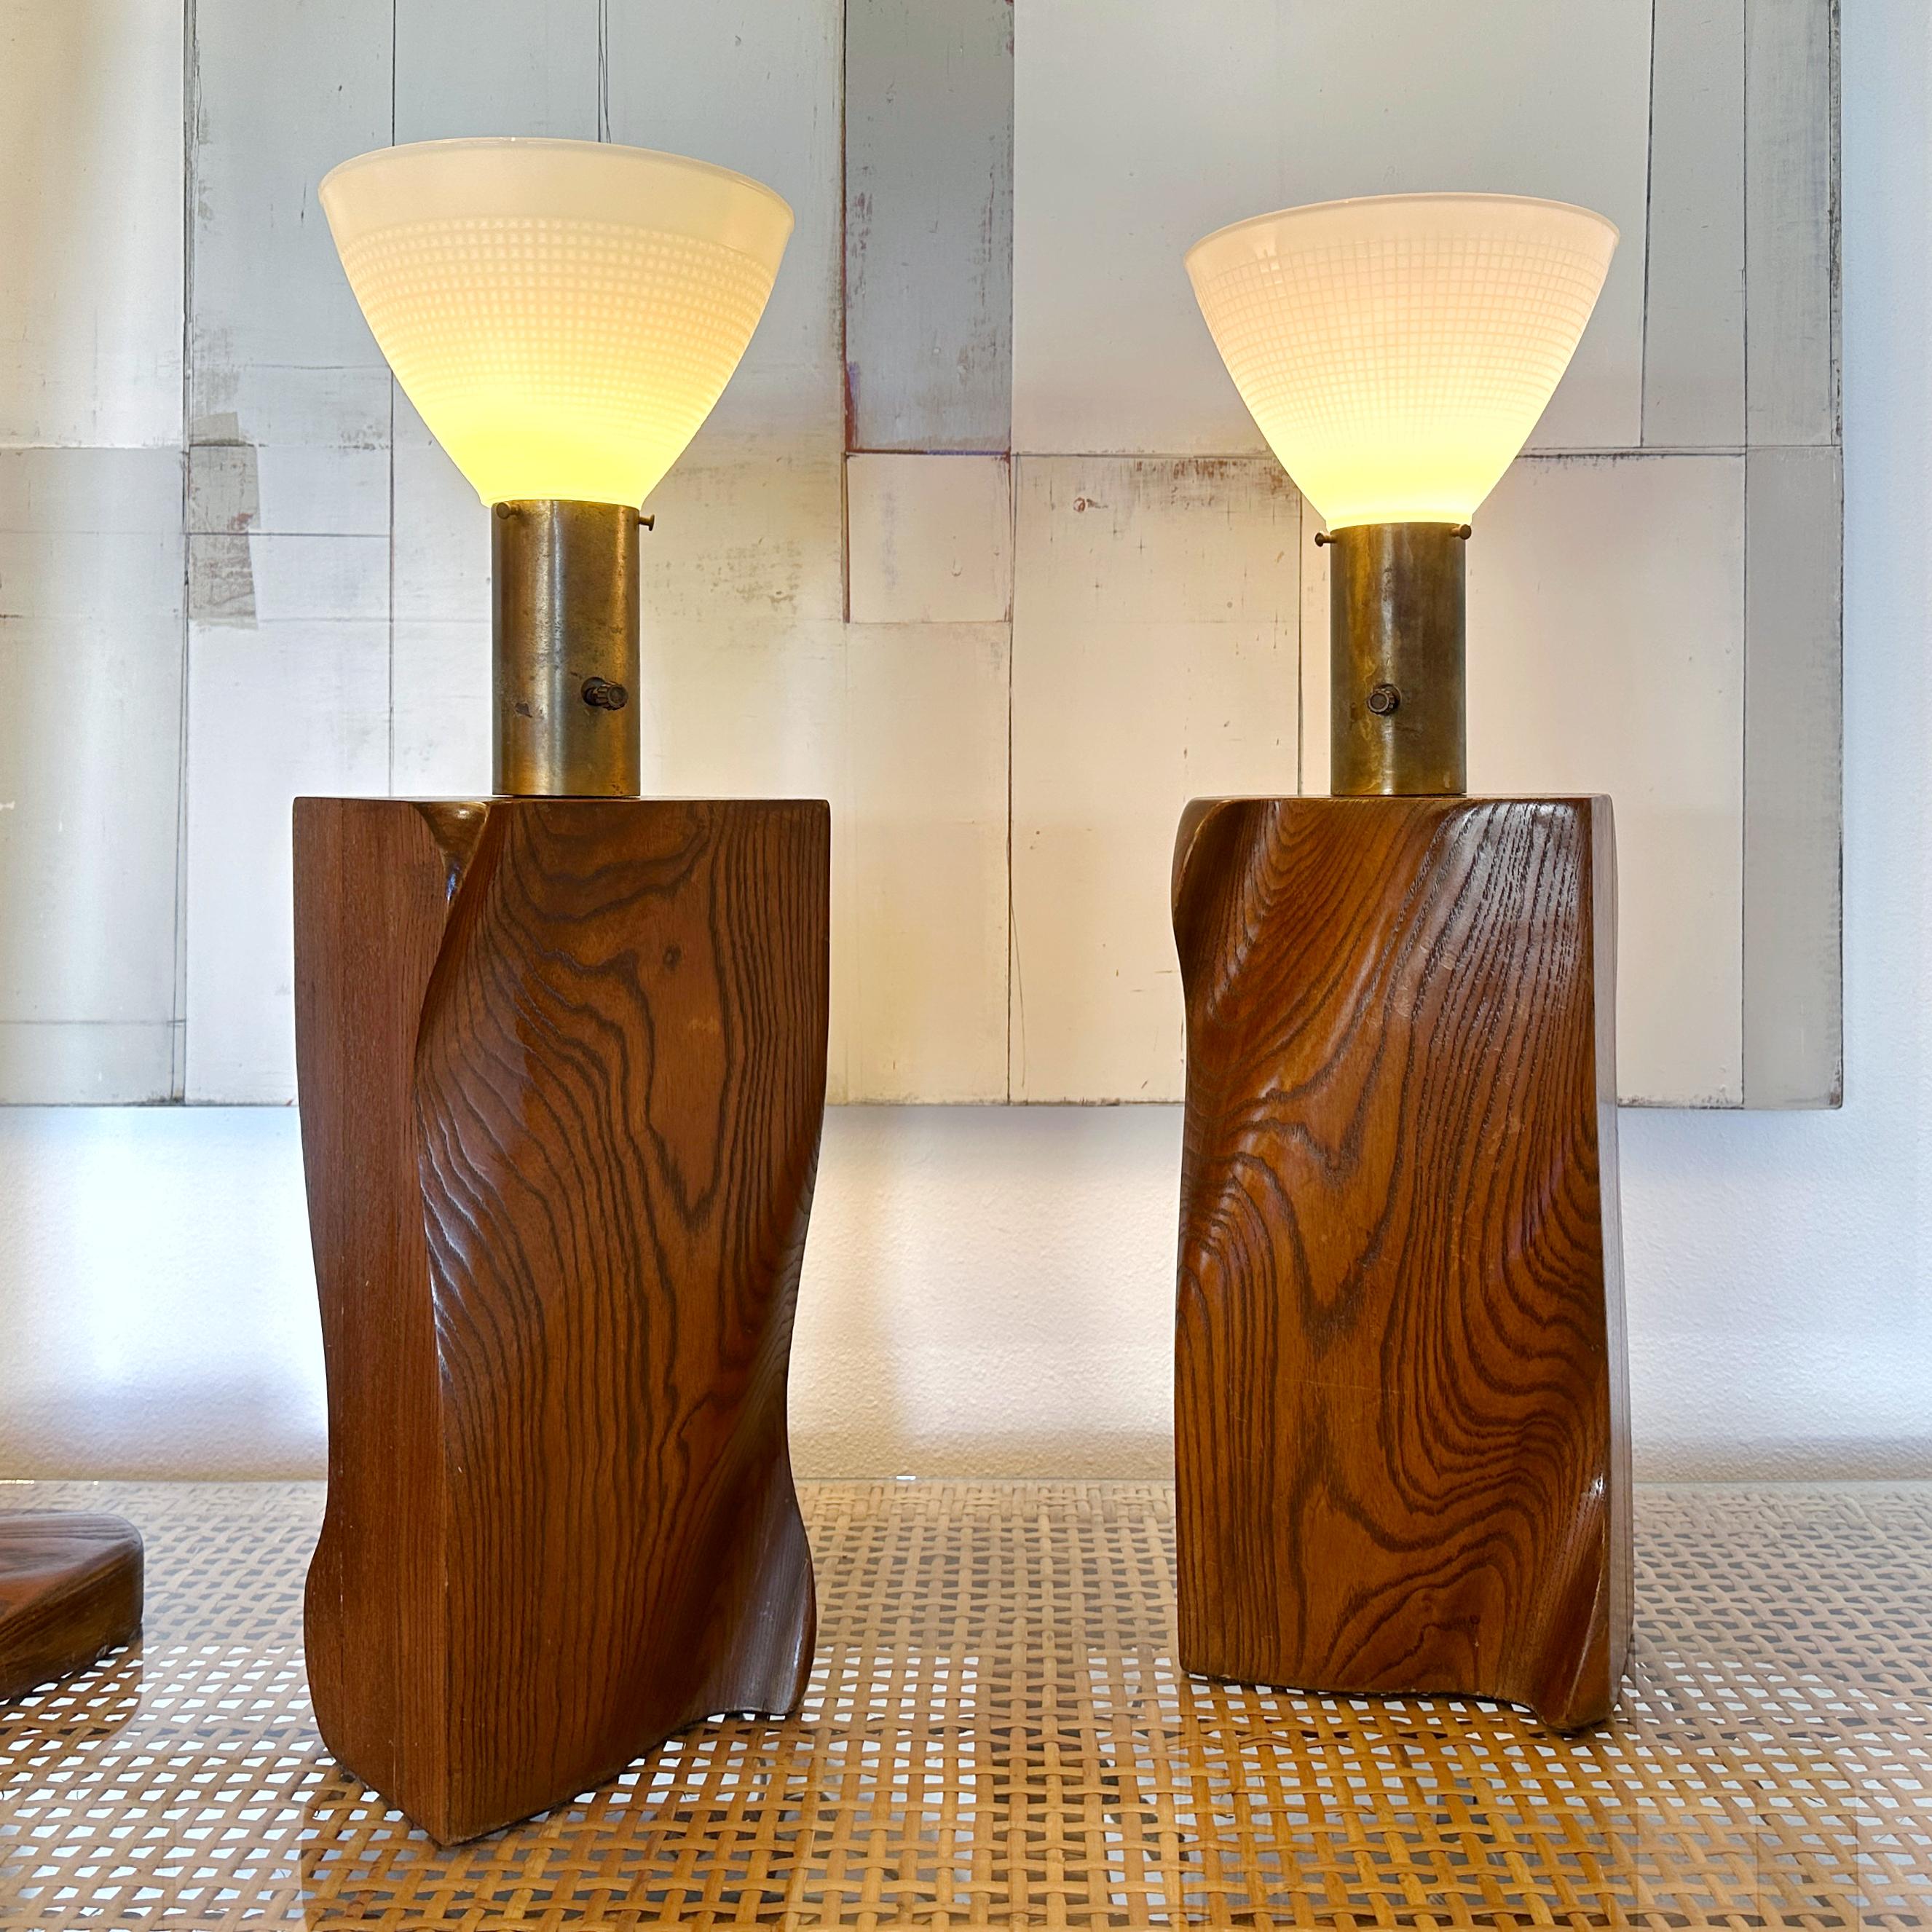 This is a fabulous pair of biomorphic sculpted walnut table lamps with milk glass shades attributed to Yasha Heifetz for The Heifetz Company of New York. The lamps were likely designed in the late 40s but were popular through the mid 1950s. These